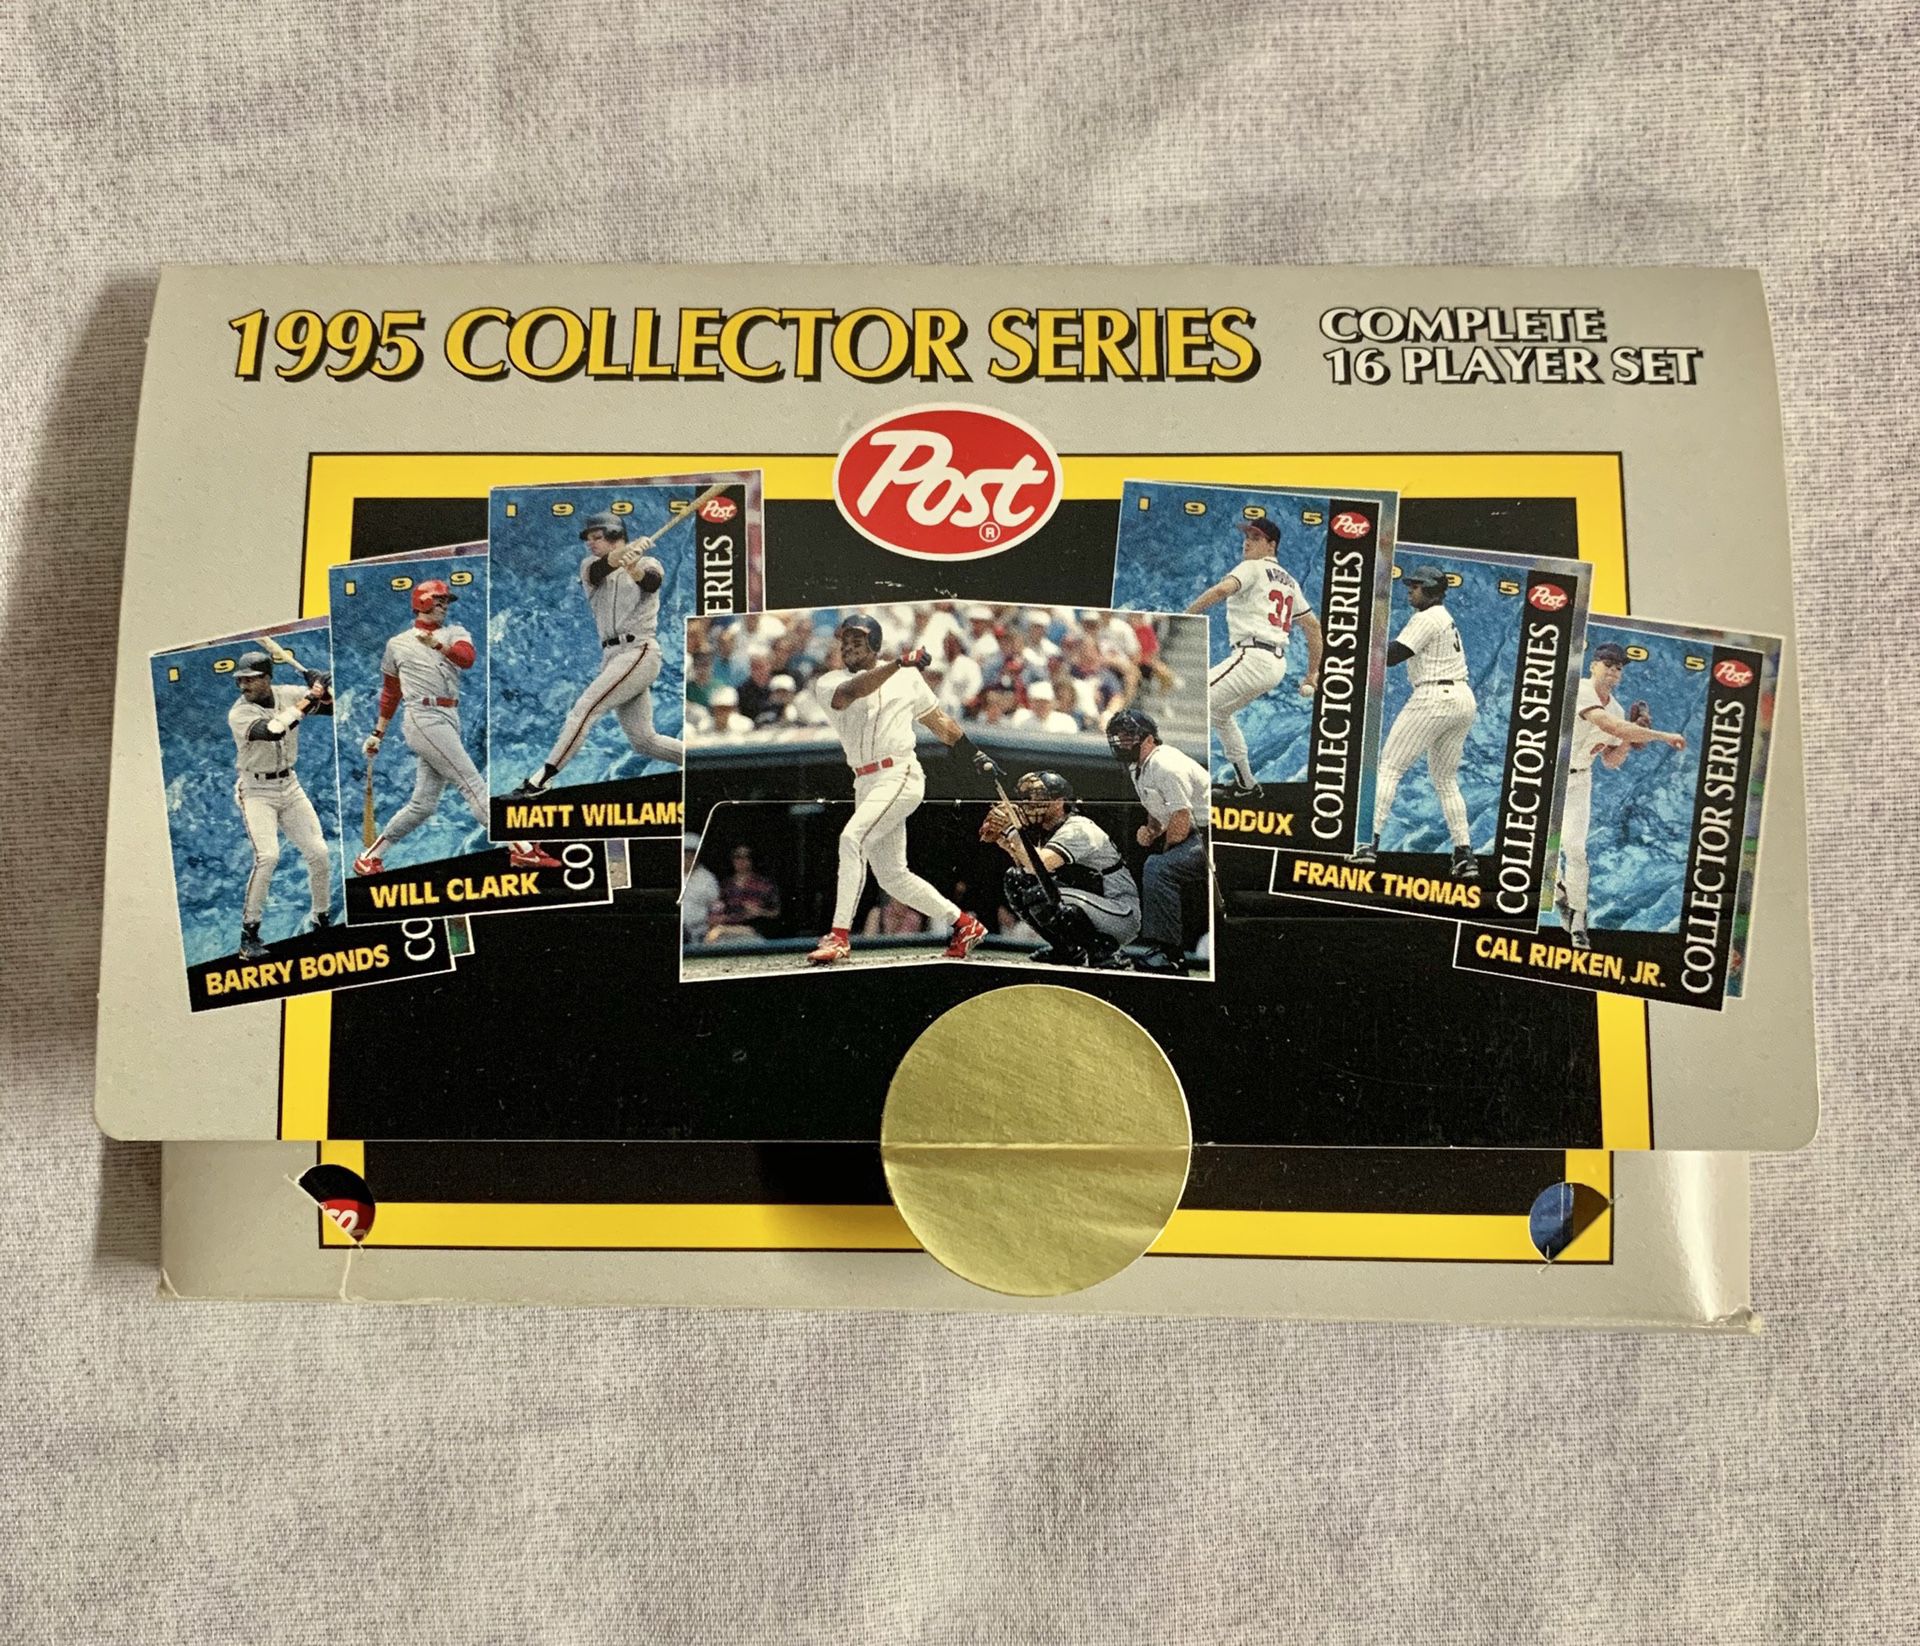 Post Baseball Cards - 1995 Collector’s Series - Complete Set